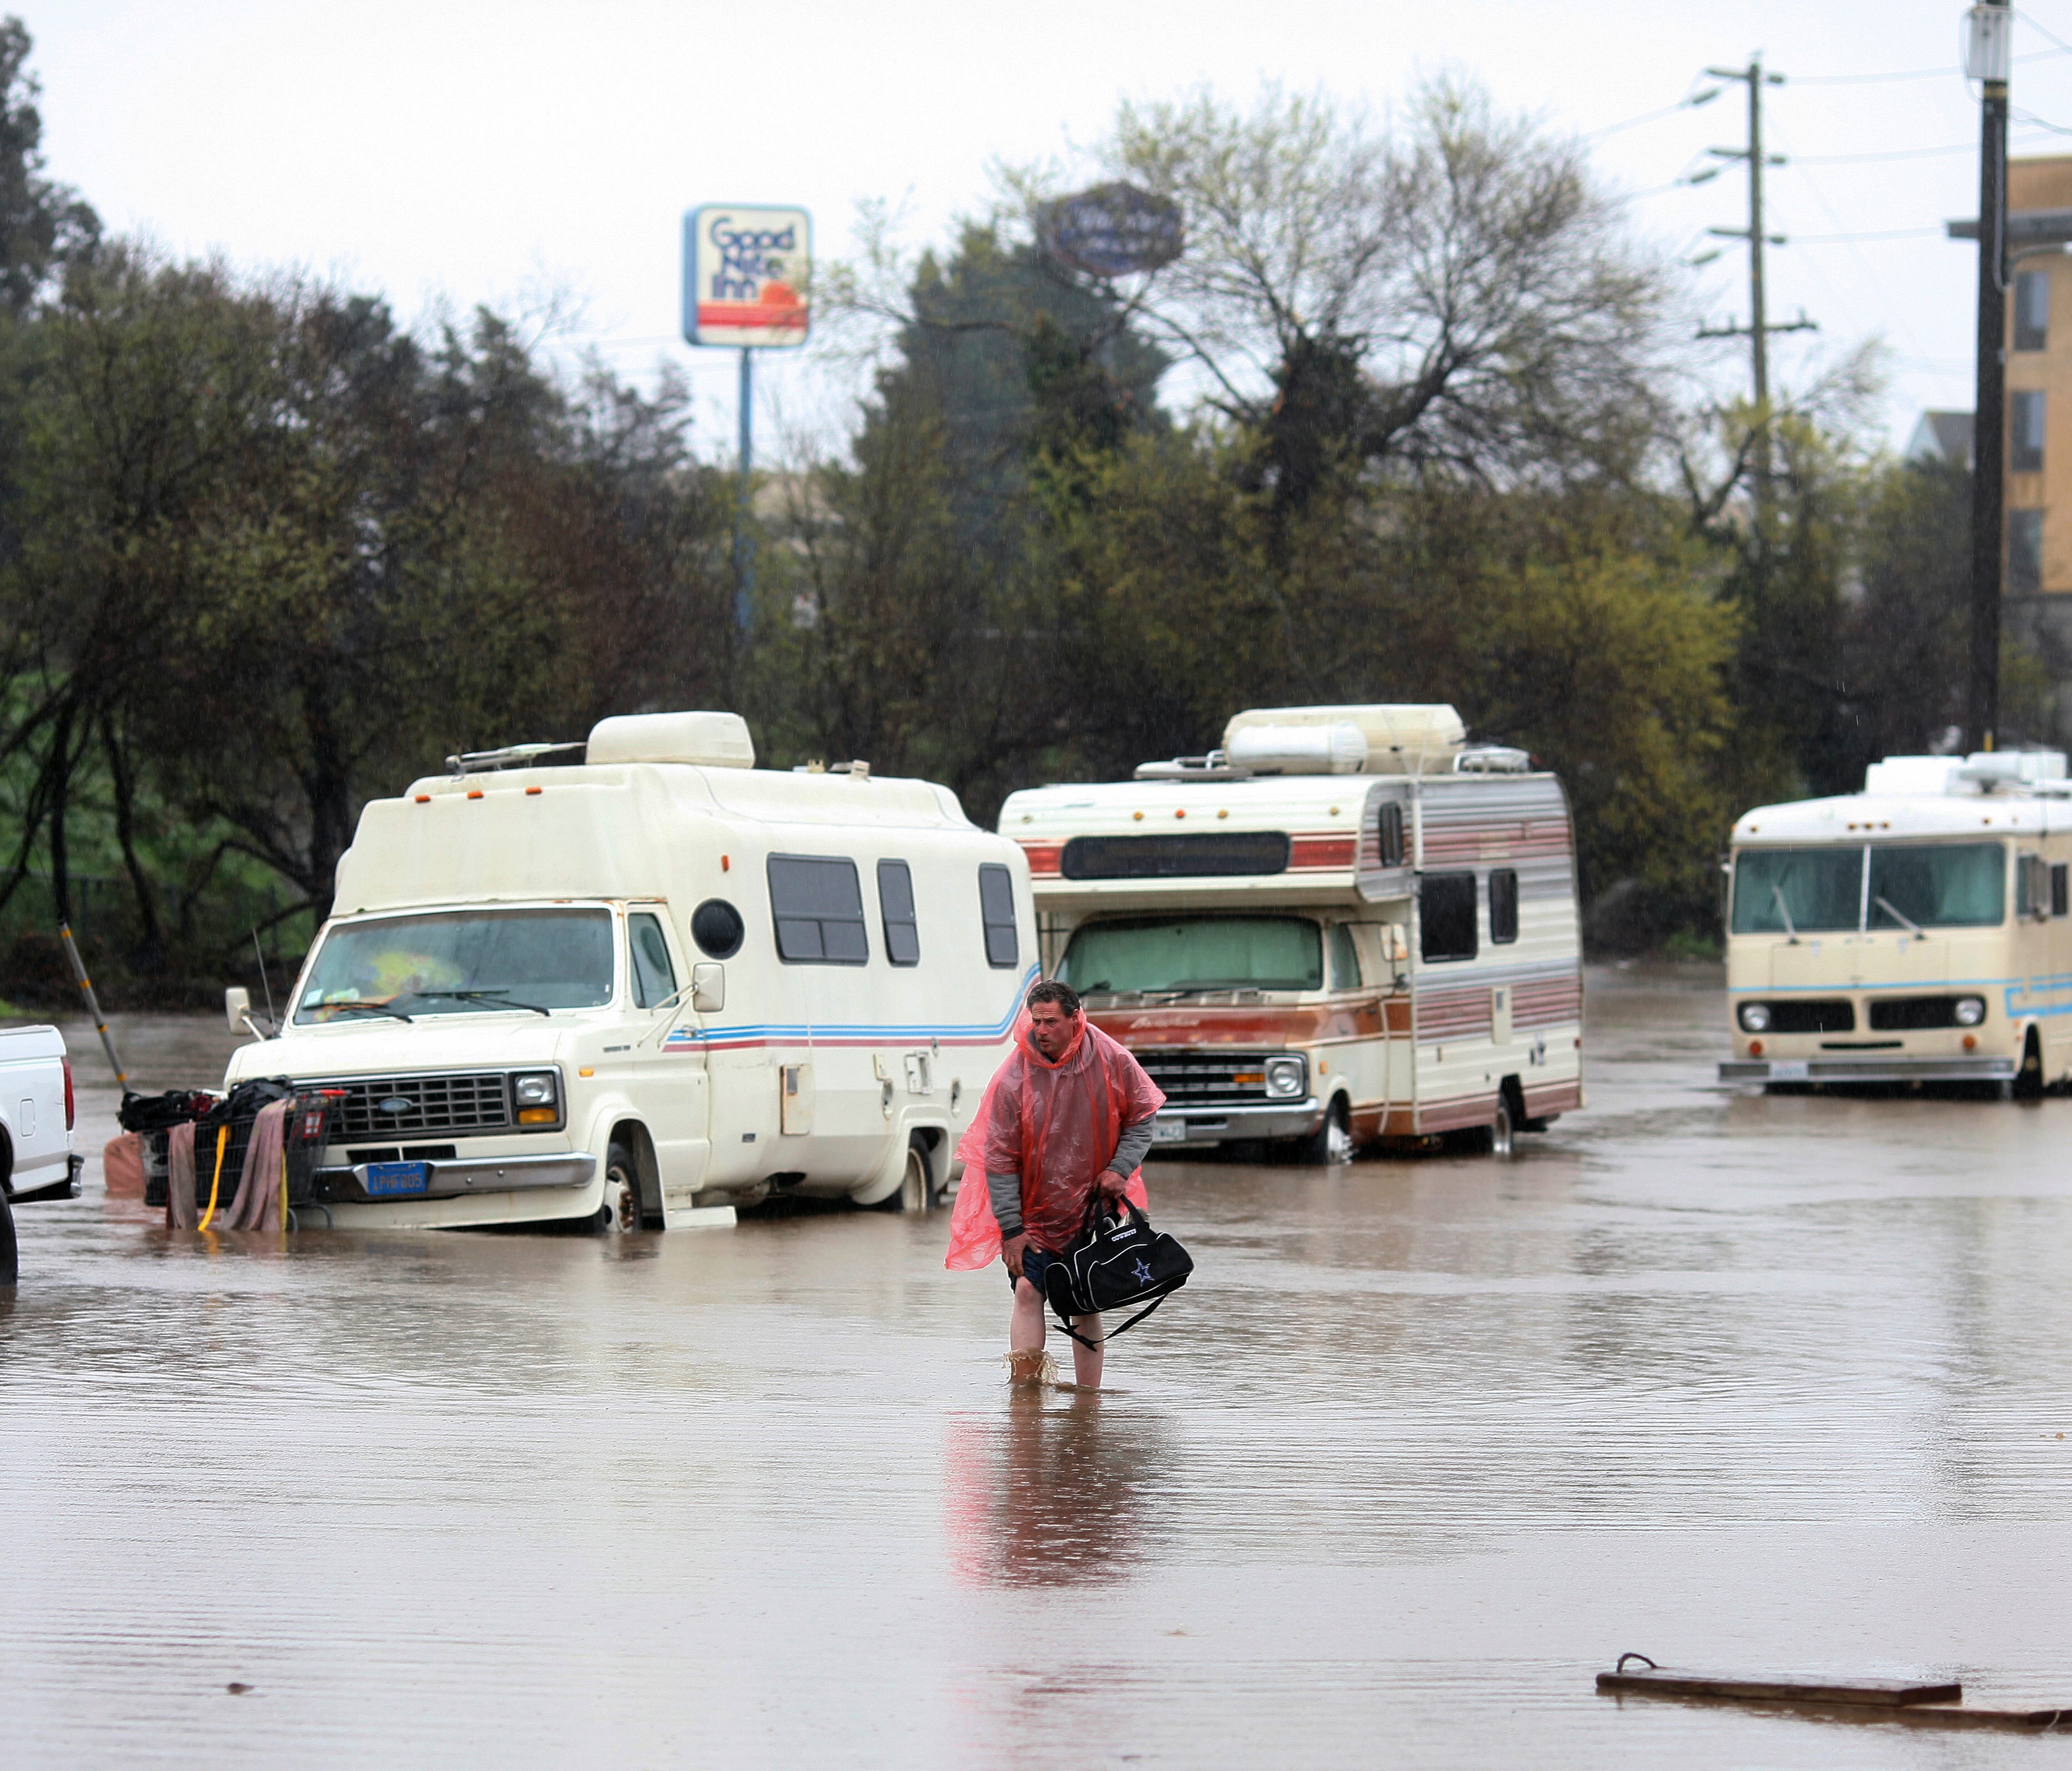 A man who lives in his RV in Salinas, Calif., walks through the flooded street on Mon., Feb. 20, 2016.